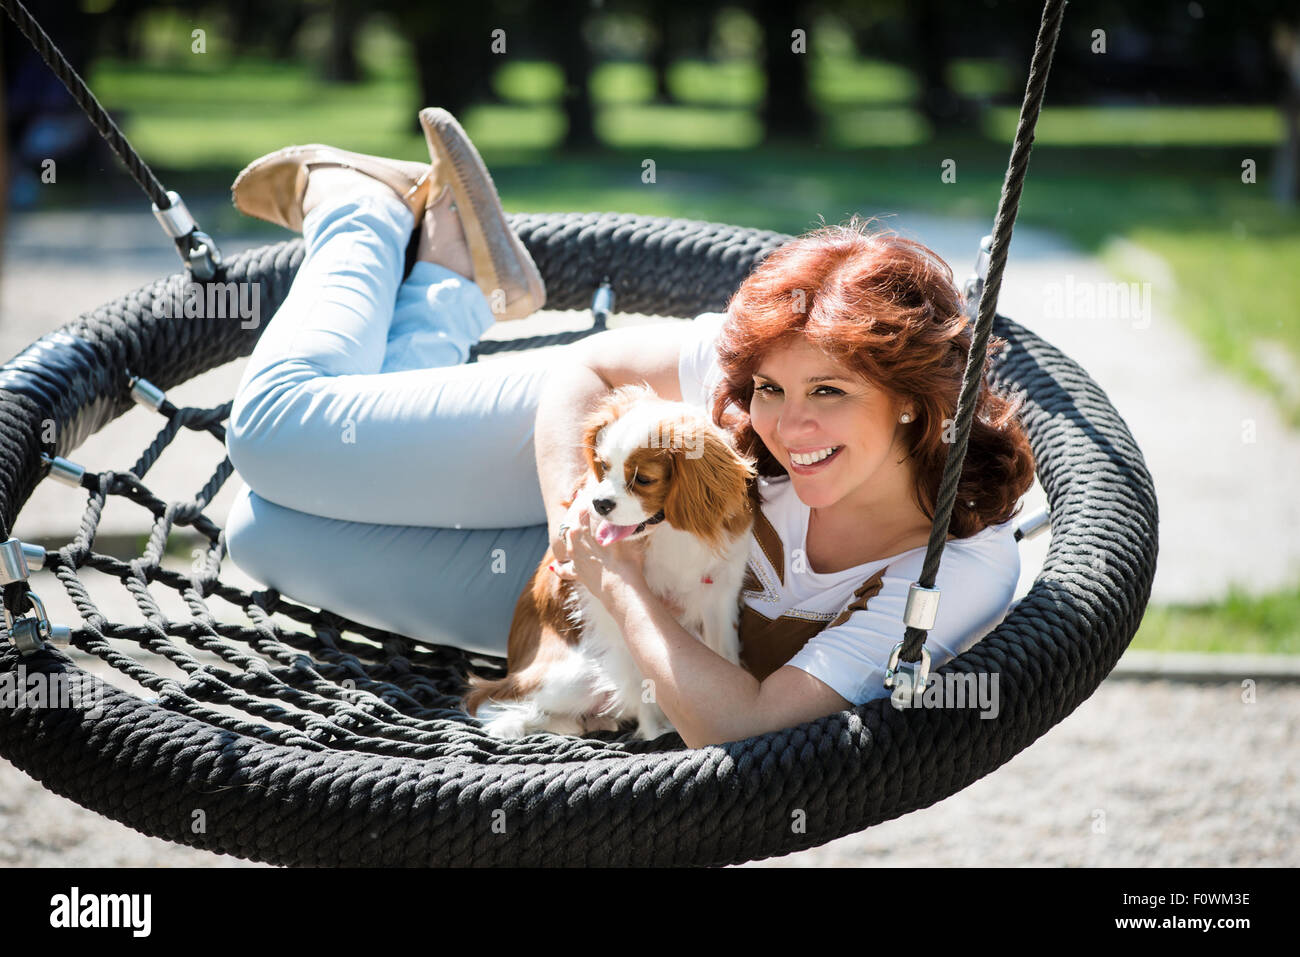 Mature woman swing with her cavalier dog outdoor in playground Stock Photo